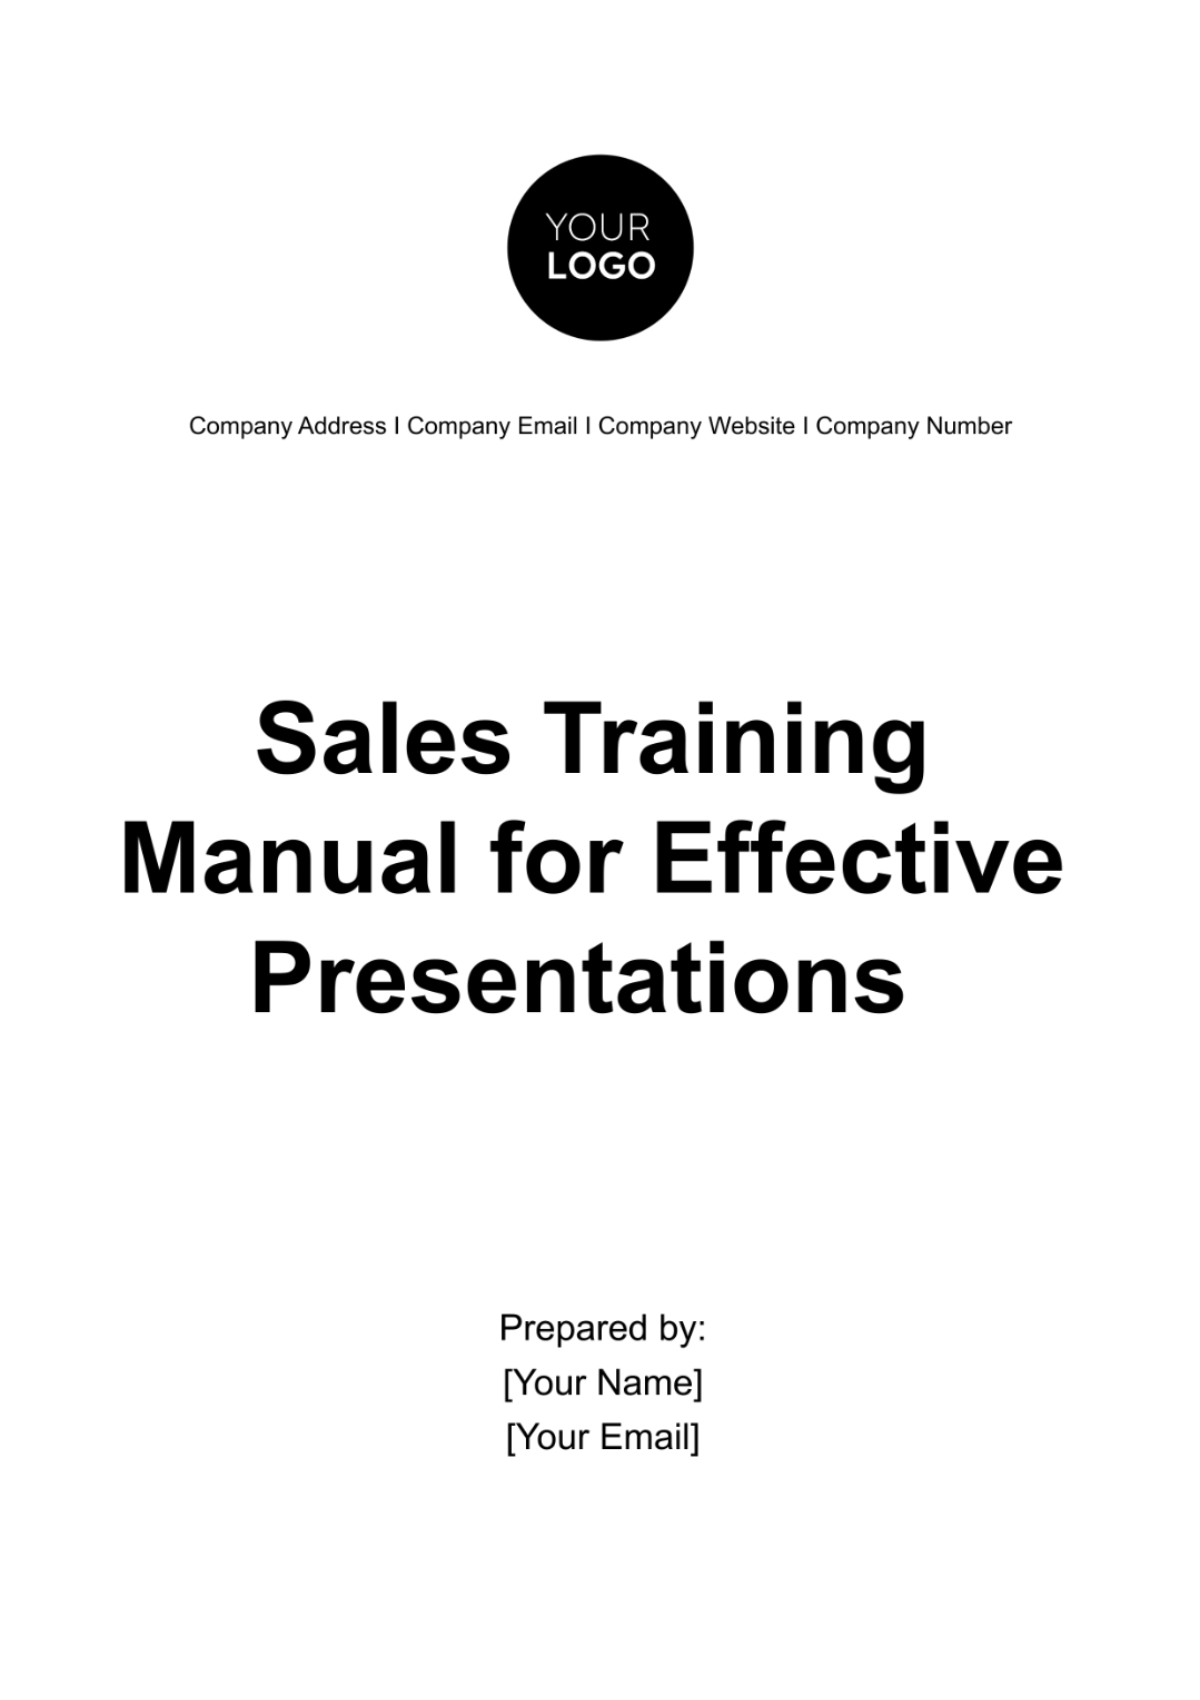 Free Sales Training Manual for Effective Presentations Template